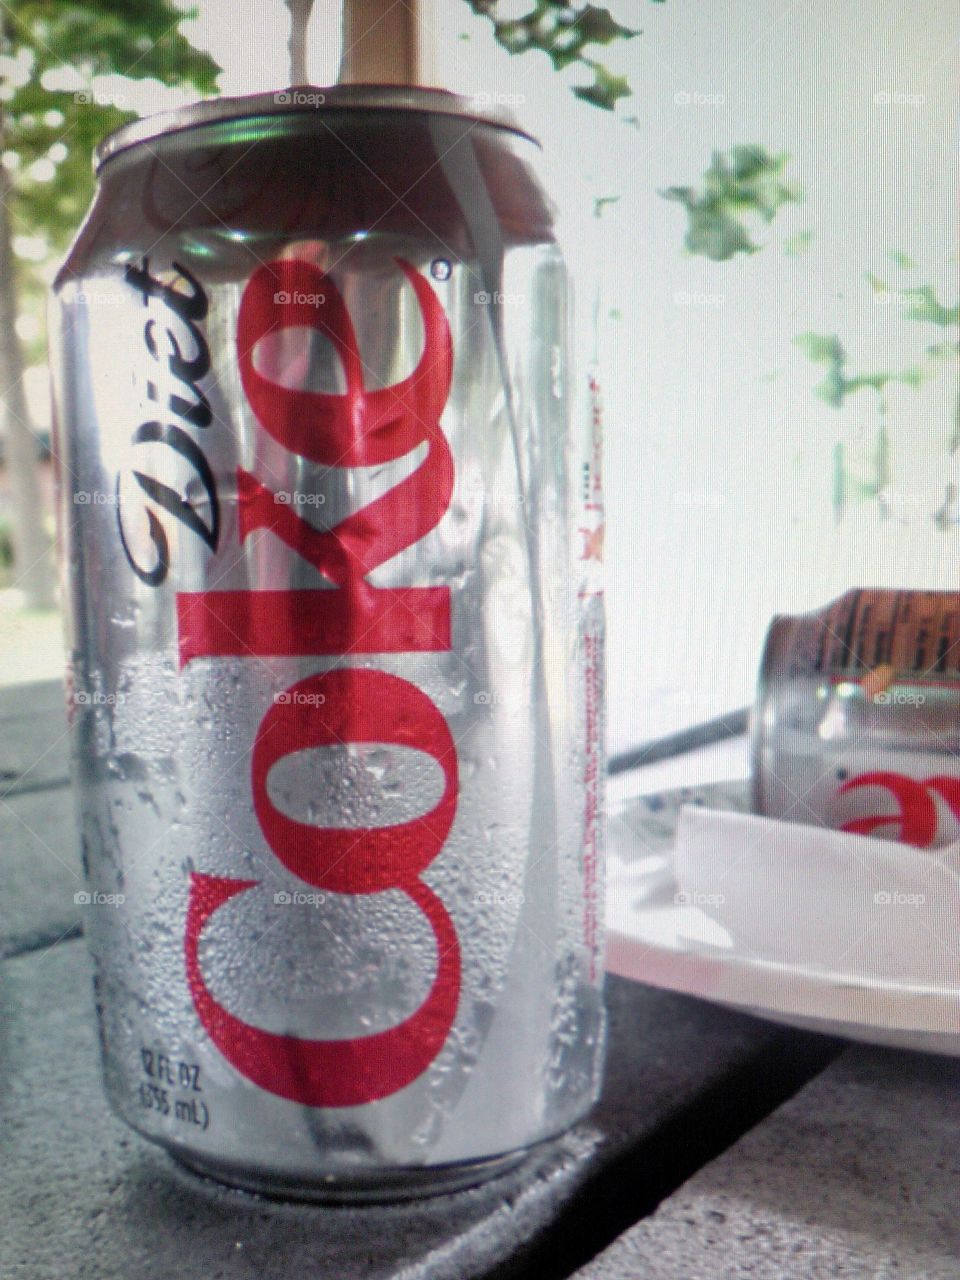 Everythings better with Diet Coke